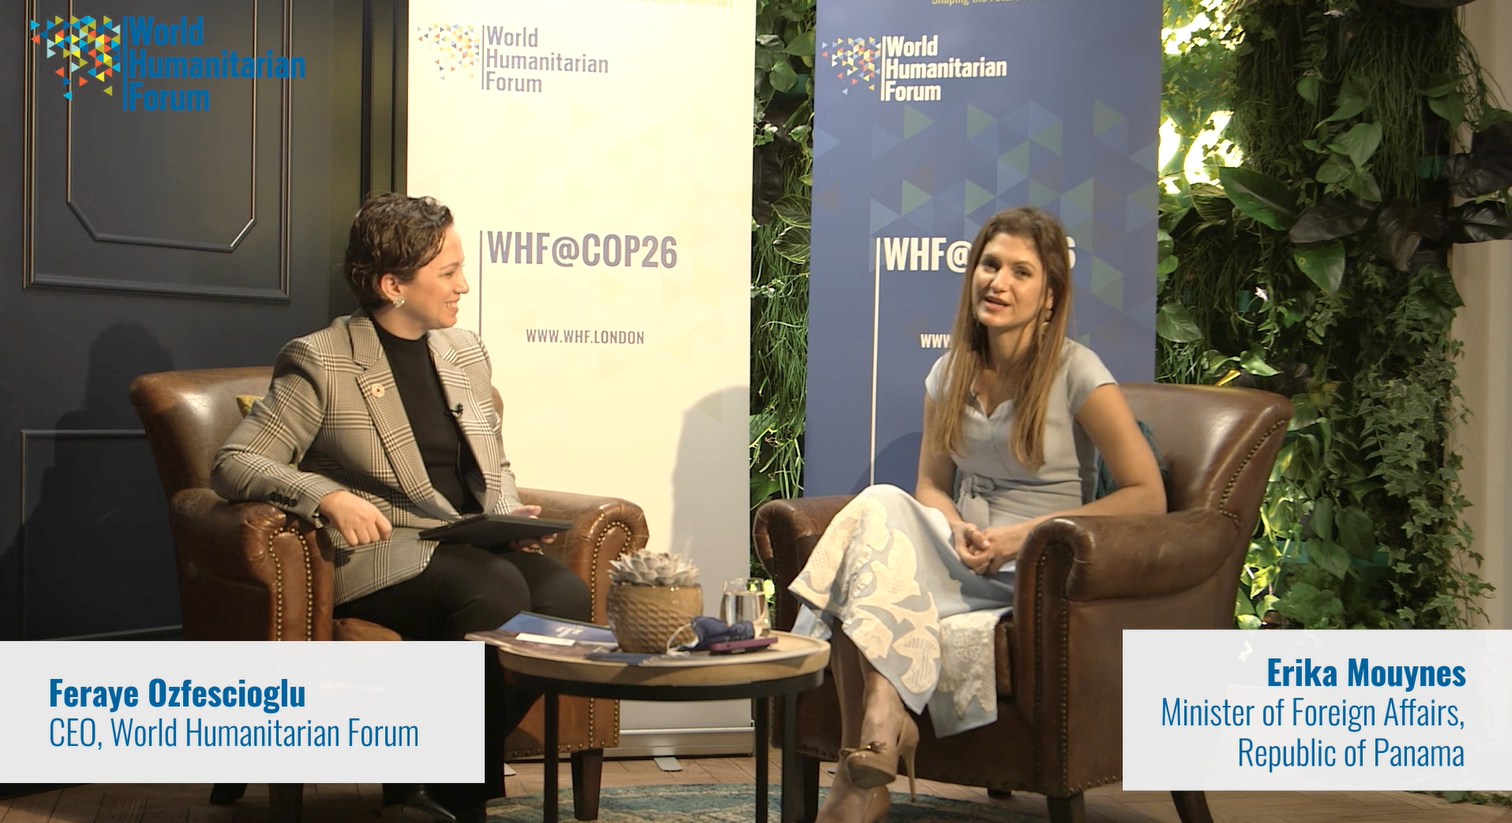 WHFTalks.Live COP26 Special Edition | Feraye Ozfescioglu, CEO, World Humanitarian Forum in conversation with Erika Mouynes, Minister of Foreign Affairs, Republic of Panama